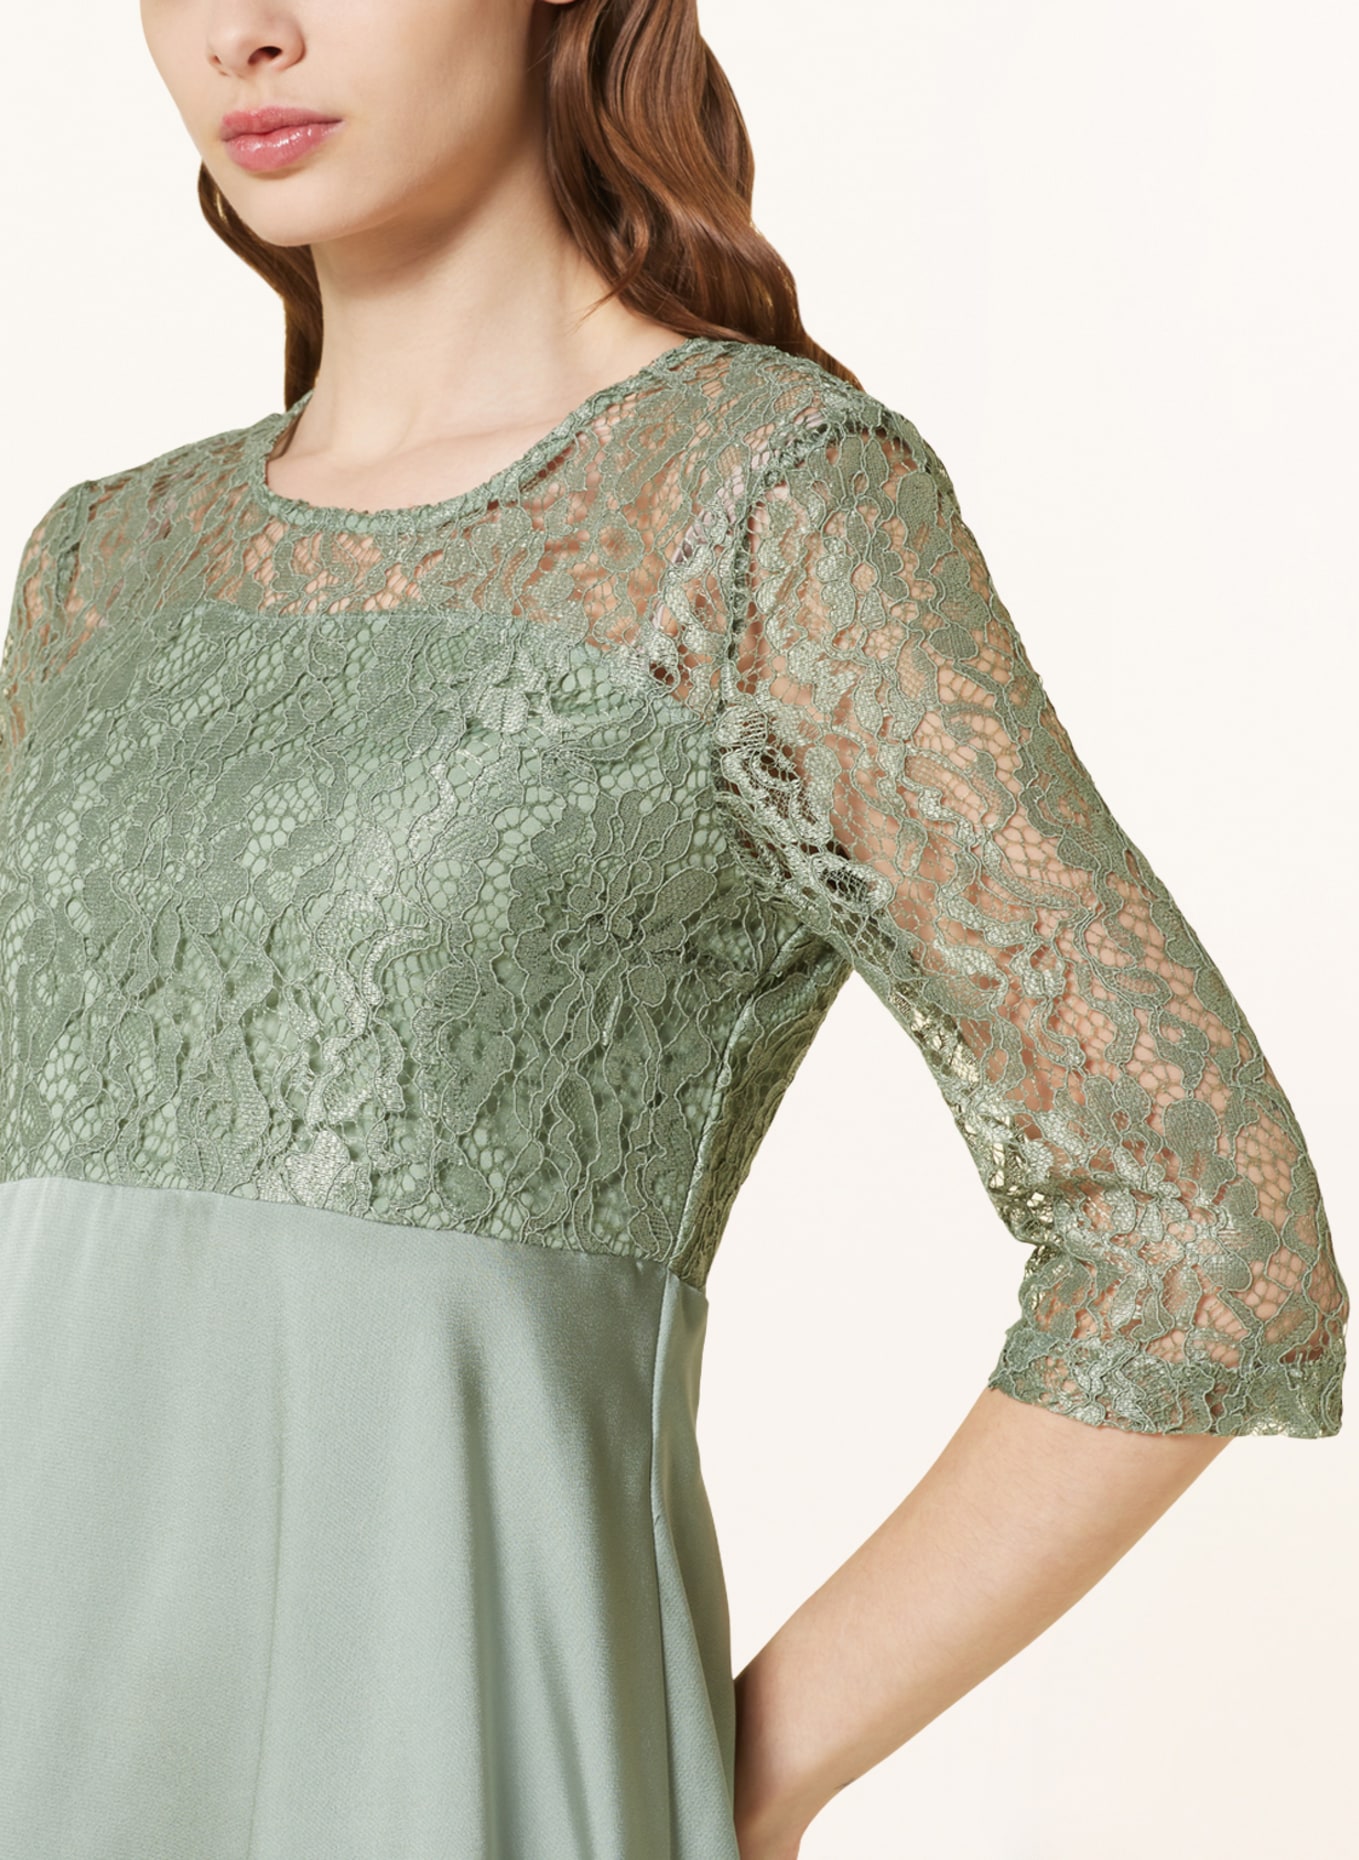 ONLY Dress with 3/4 sleeves and lace, Color: GREEN (Image 4)